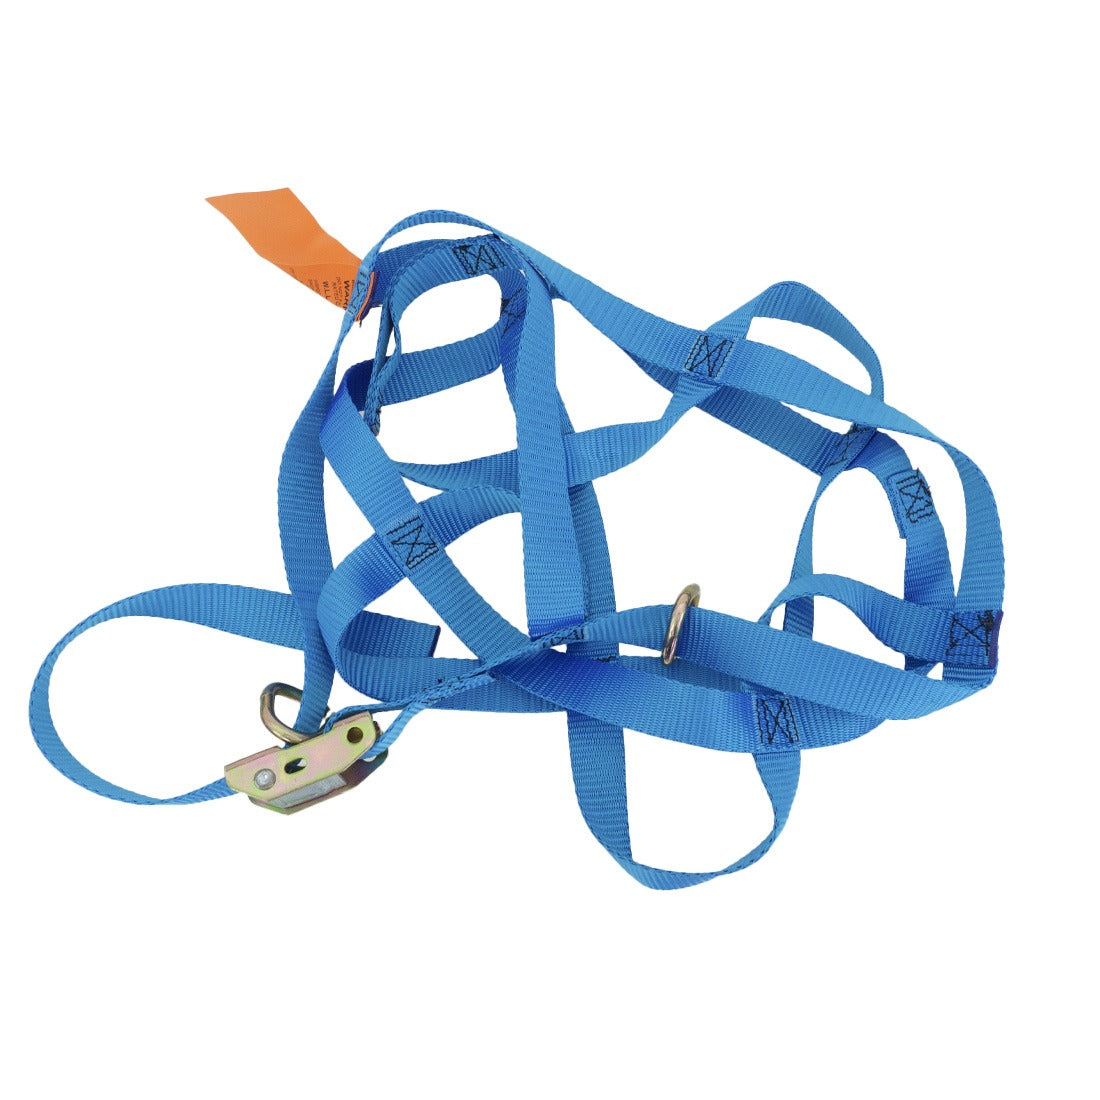 Full Body Rope Harness: Achieve Ultimate Security and Confidence